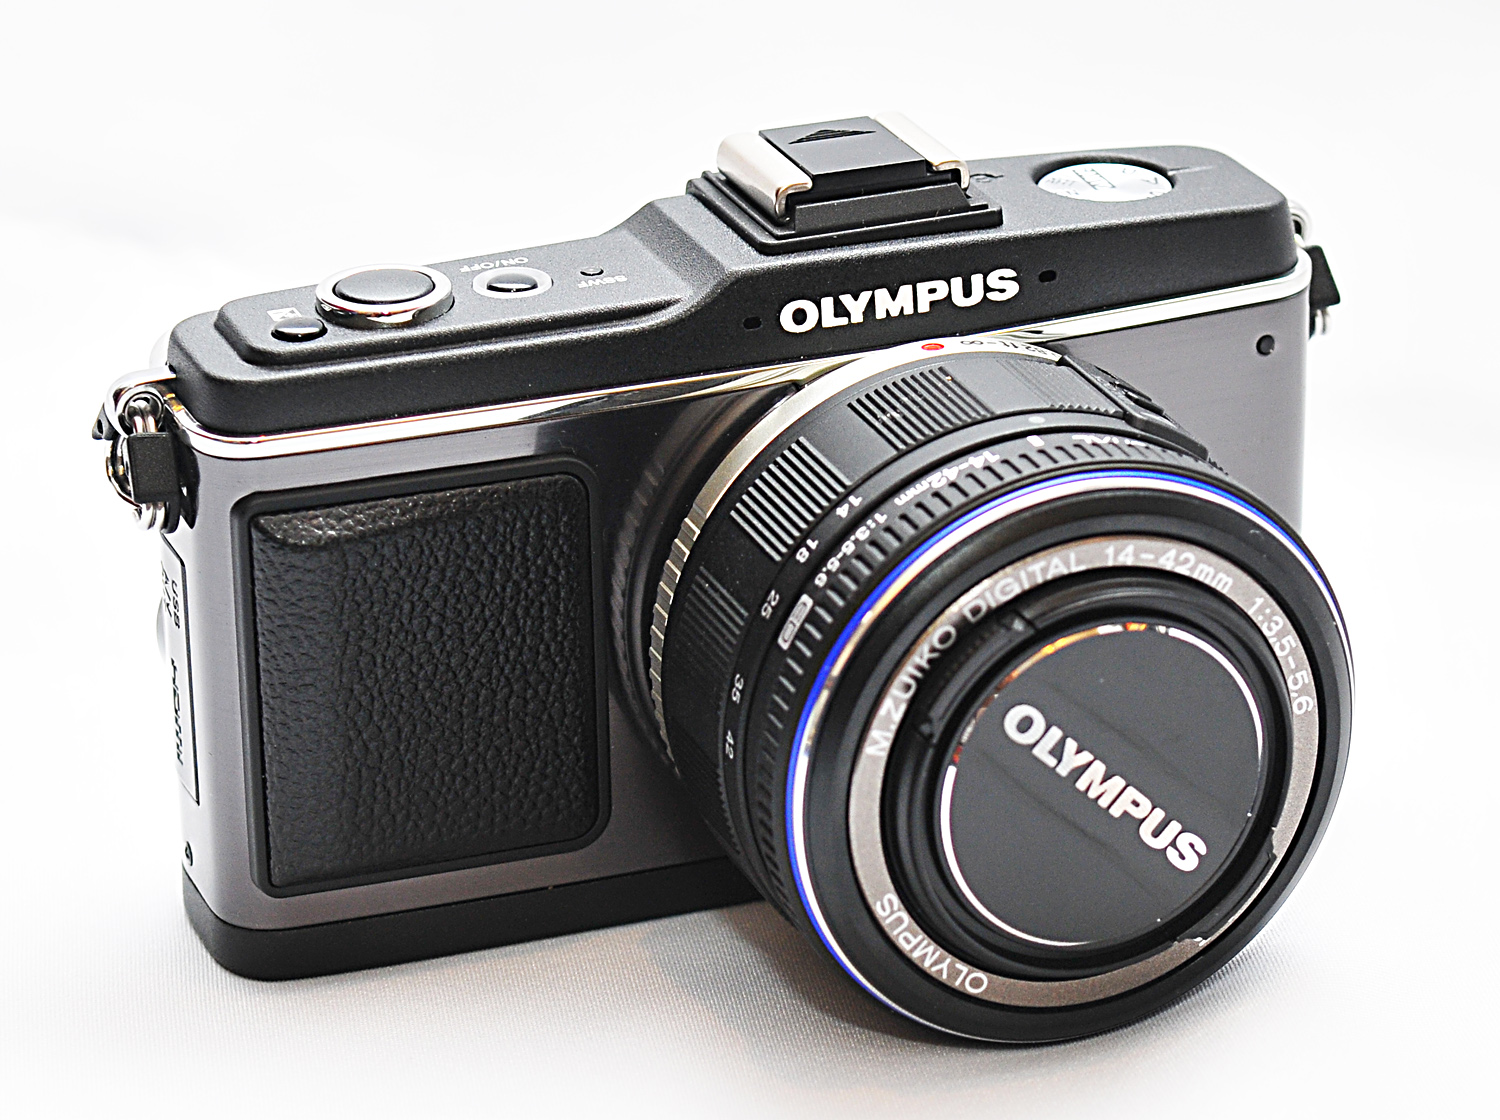 Digitally Exposed: First Impressions: Olympus E-P2